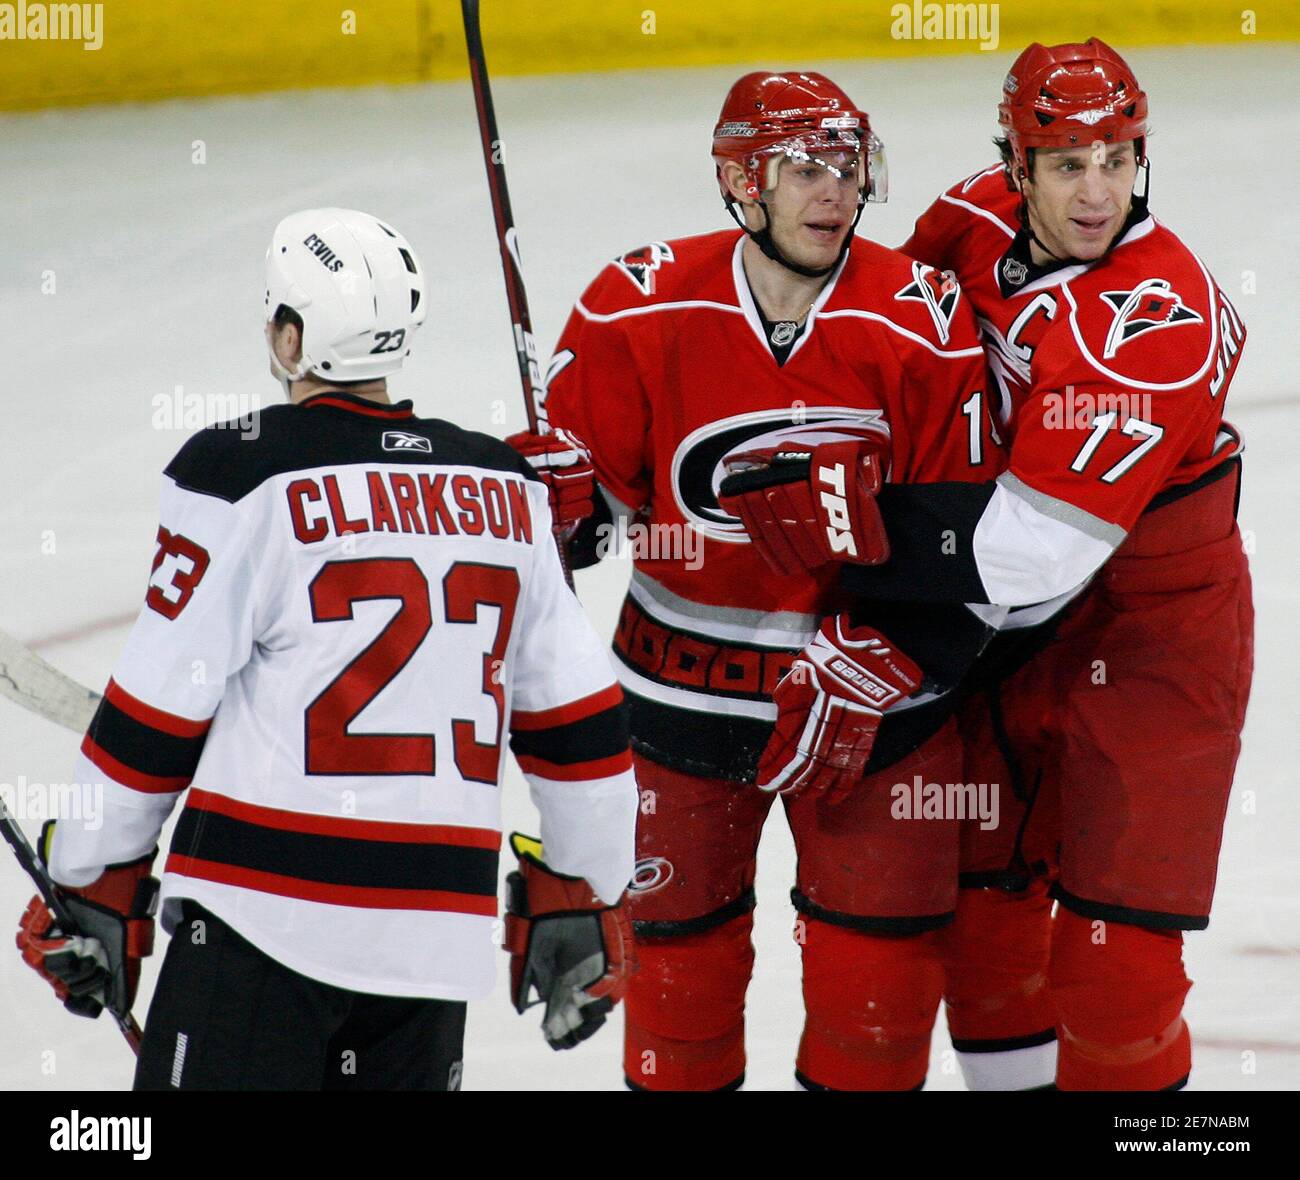 Carolina Hurricanes' Rod Brind'Amour (R) and Sergei Samsonov (C) react  following Samsonov's third period goal against New Jersey Devils as the  Devils' David Clarkson skates past during their NHL hockey game in